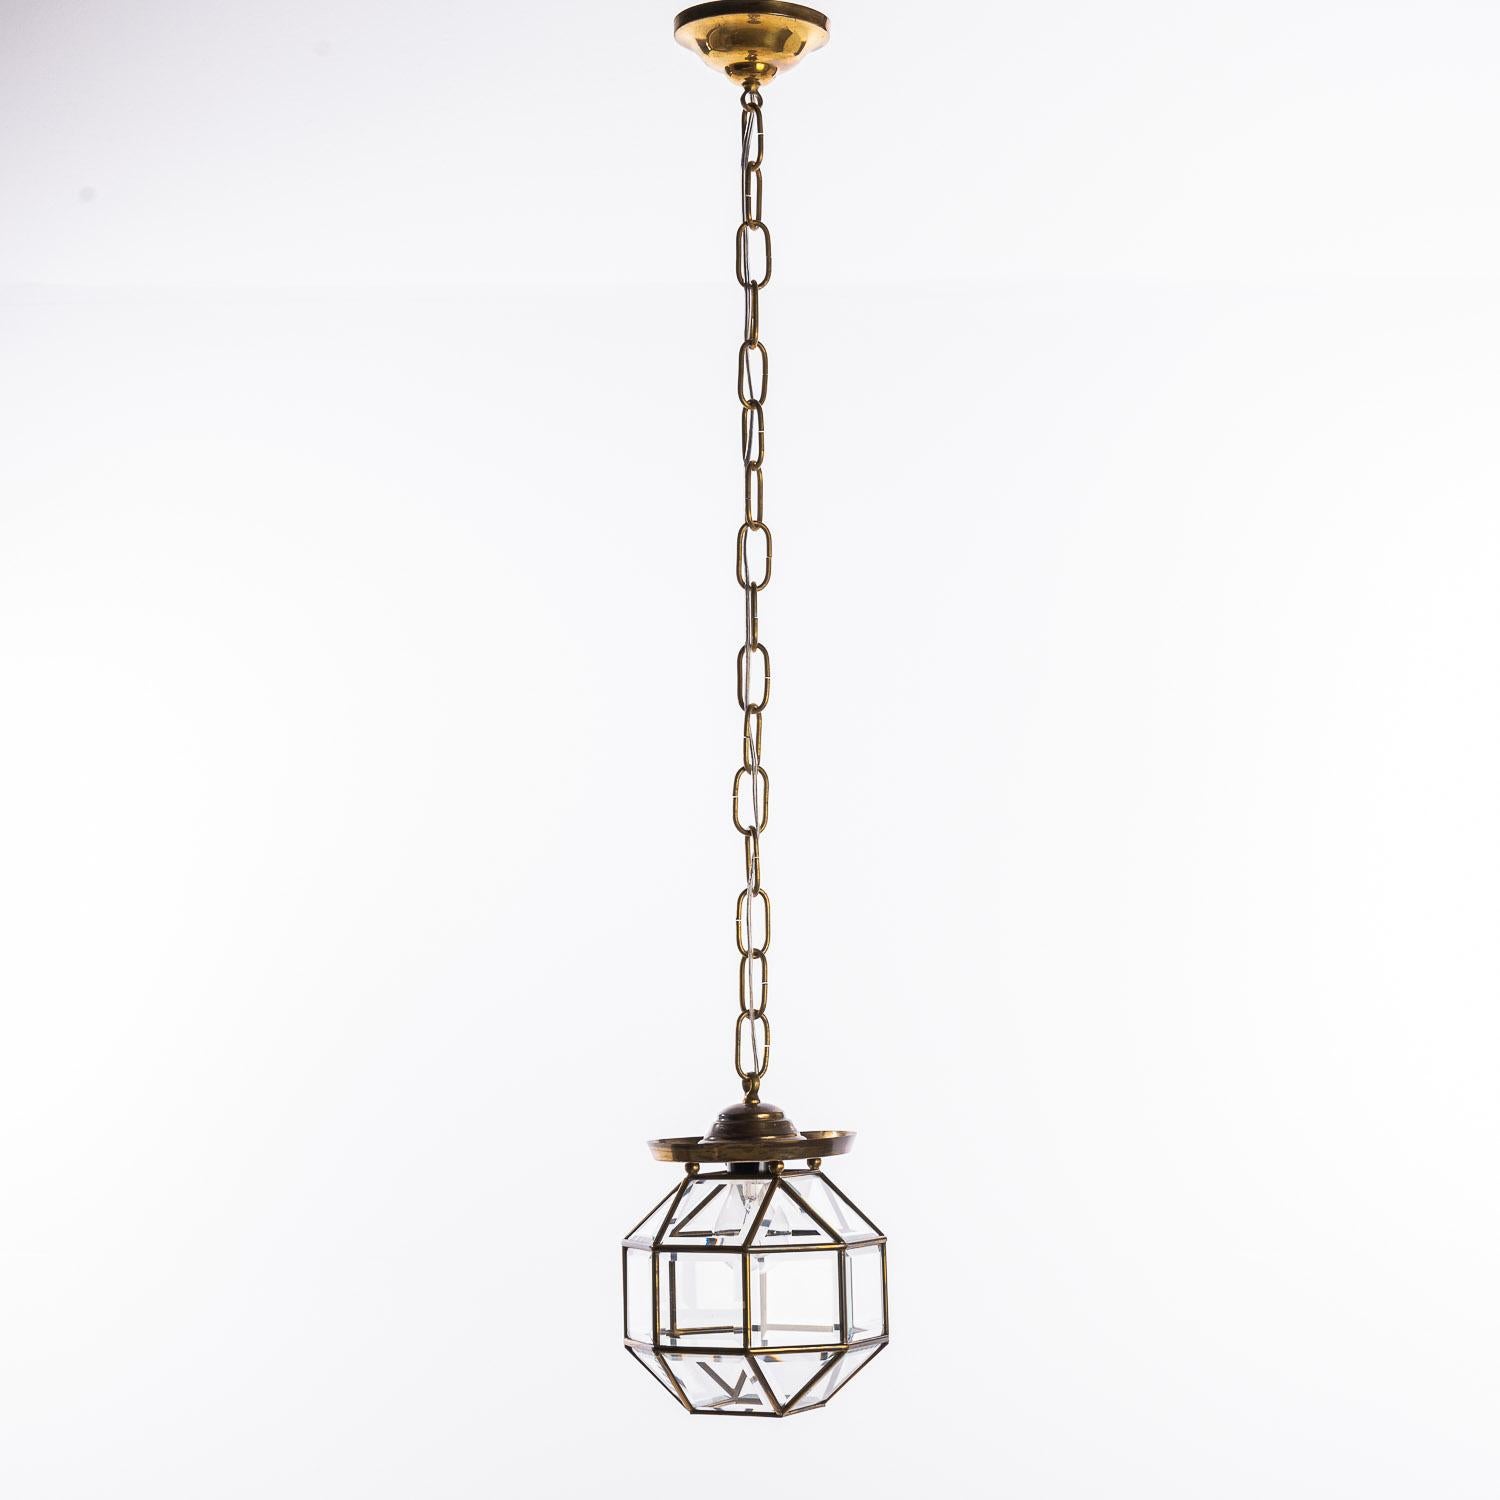 Amsterdam School long chain lantern from manufactured between 1900 -1920. Consists of a copper frame with facet cut glass windows. The lamp is still in good condition considering its age. One piece has a dent in the top. The glass is in very good